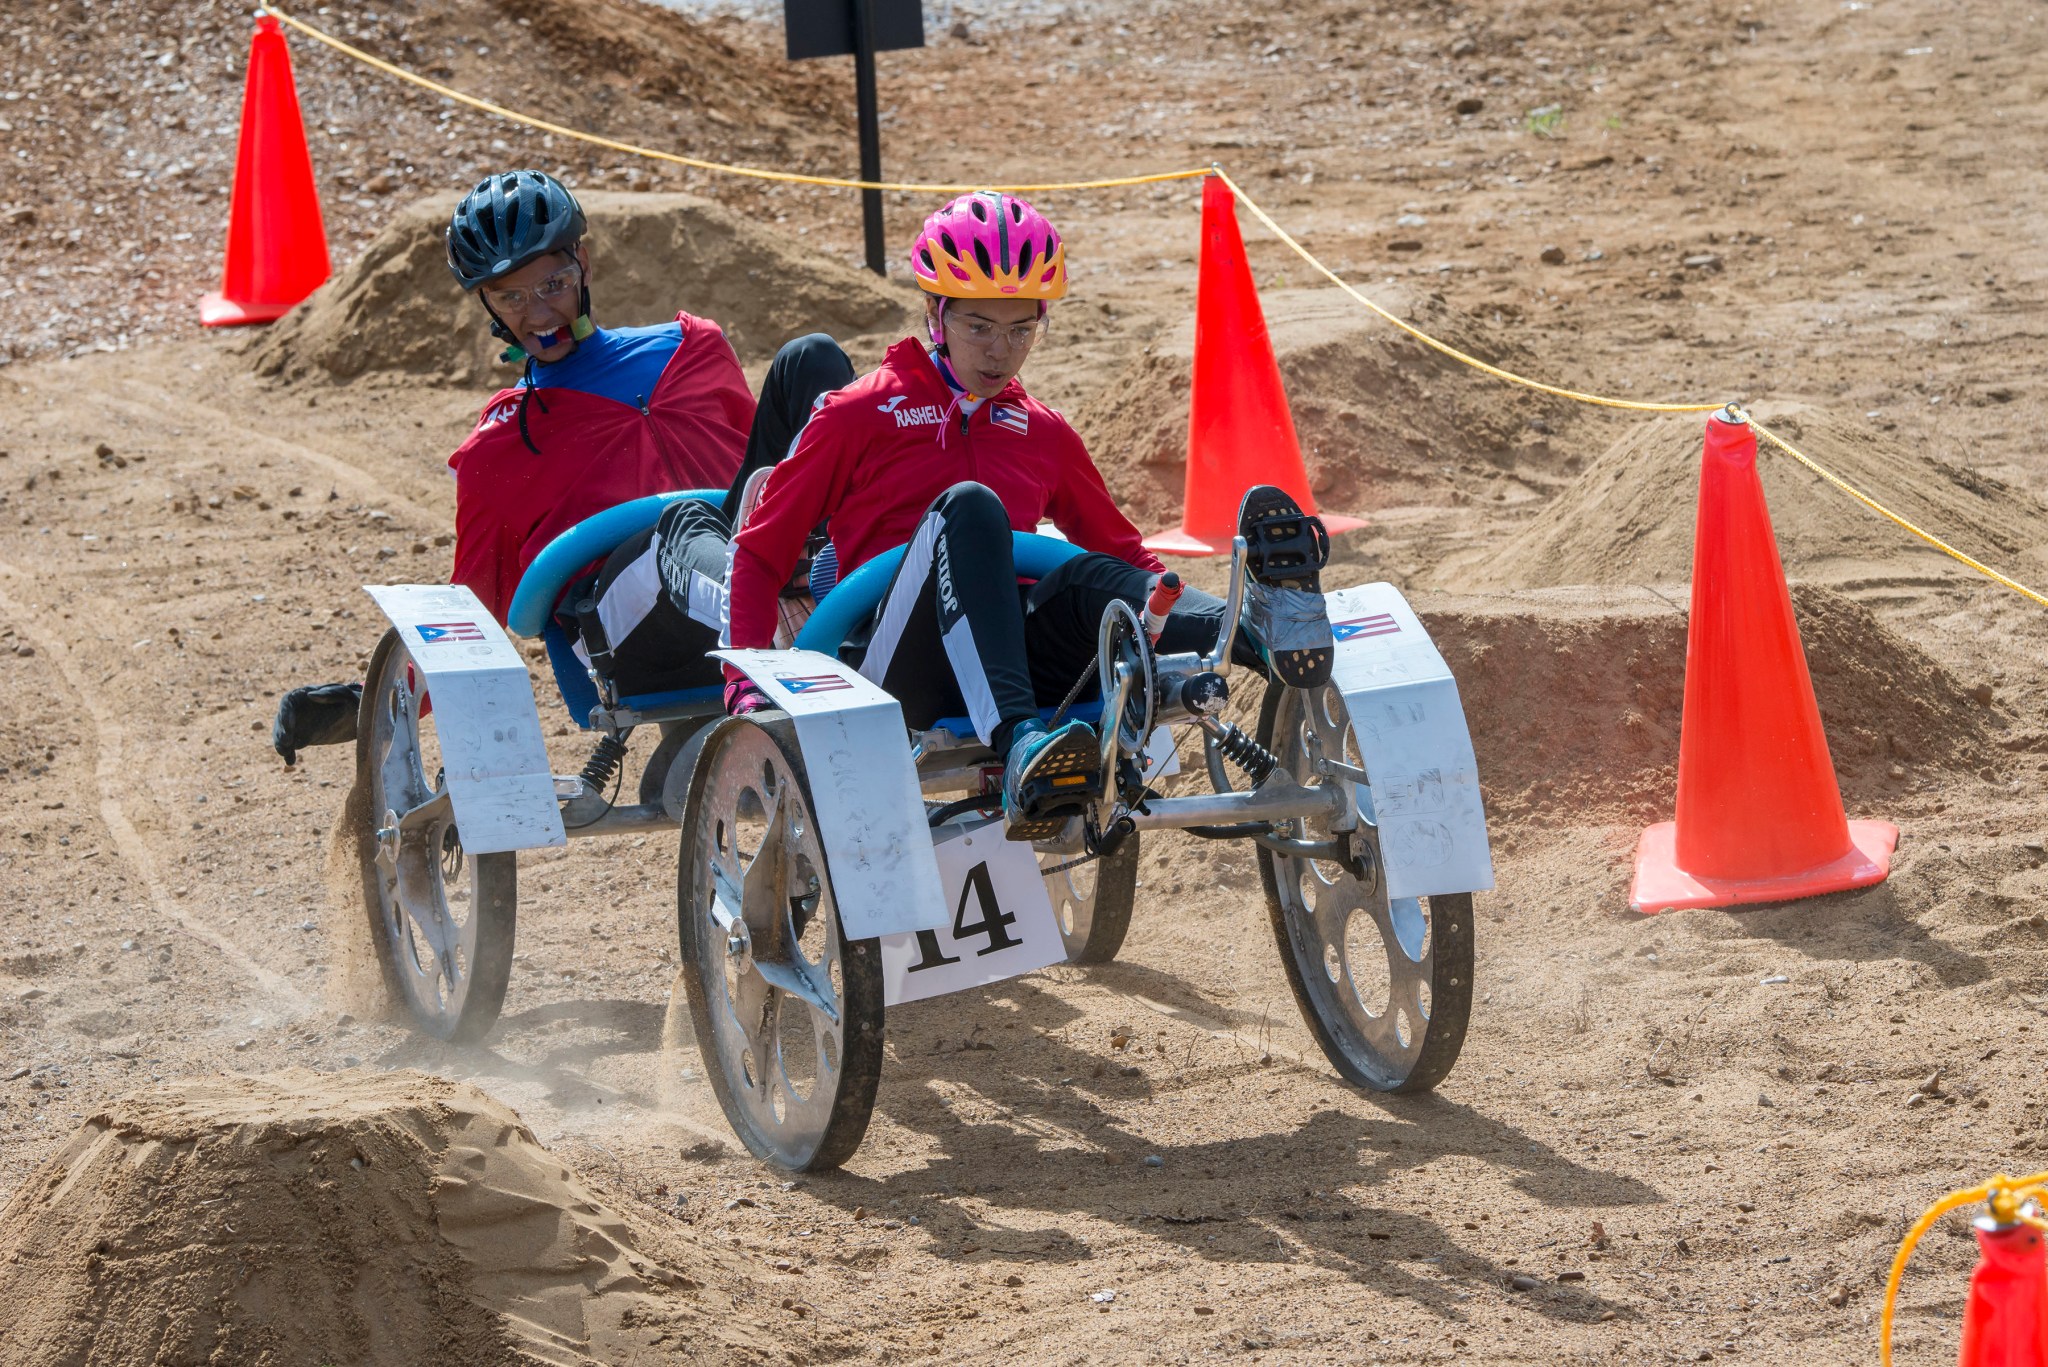 A team competes during the 2018 Human Exploration Rover Challenge.